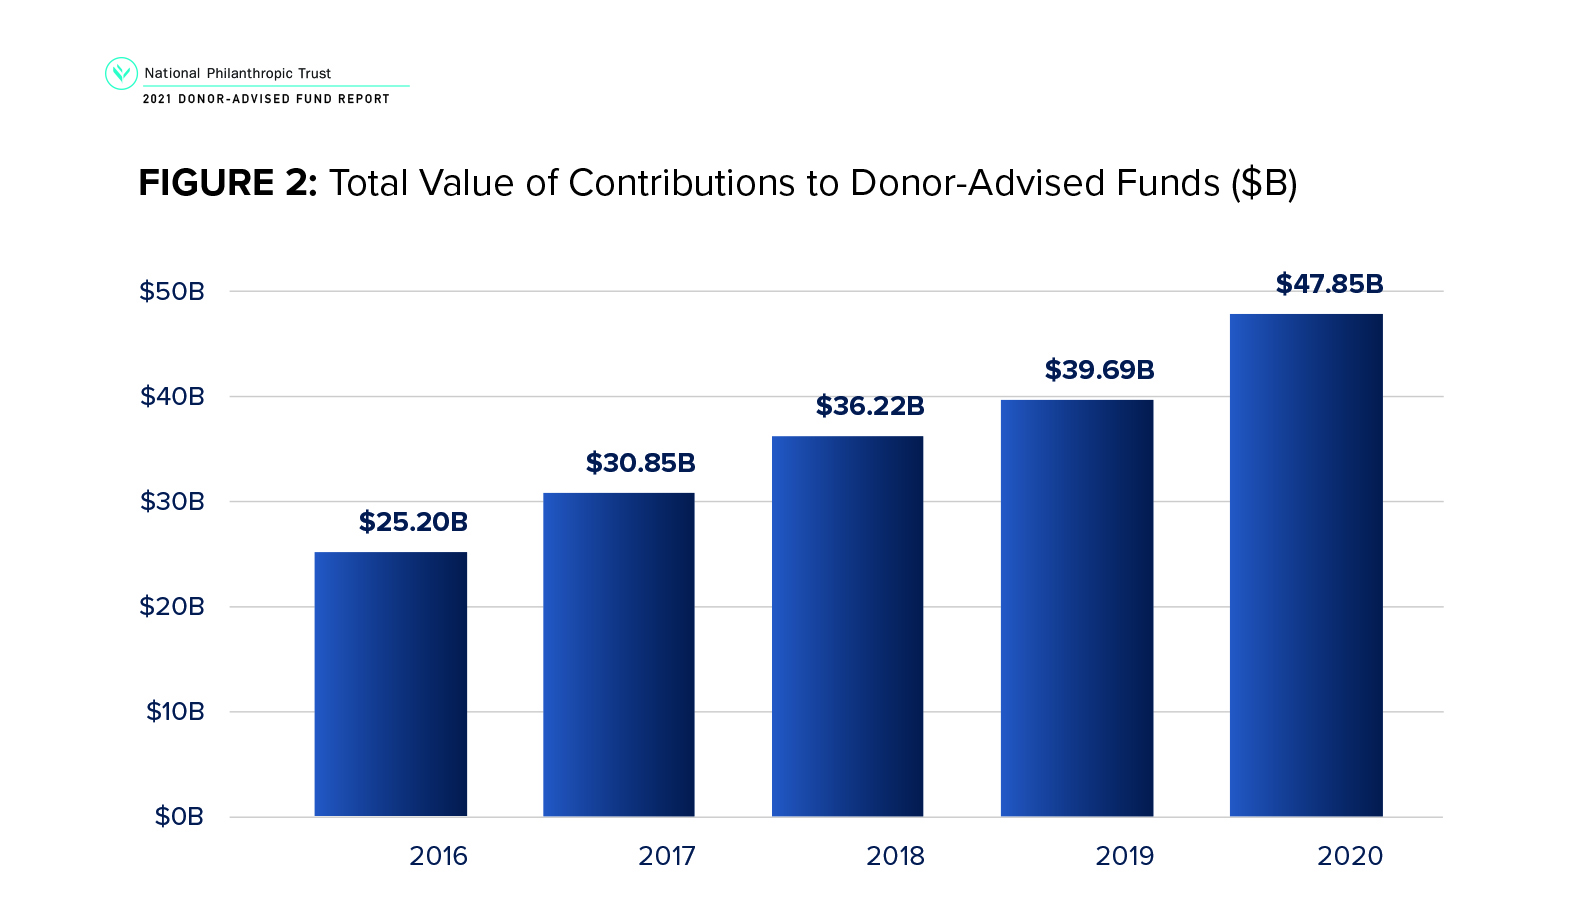 Figure 2 is a bar chart of total value of contributions to donor-advised funds in billions from 2016-2020